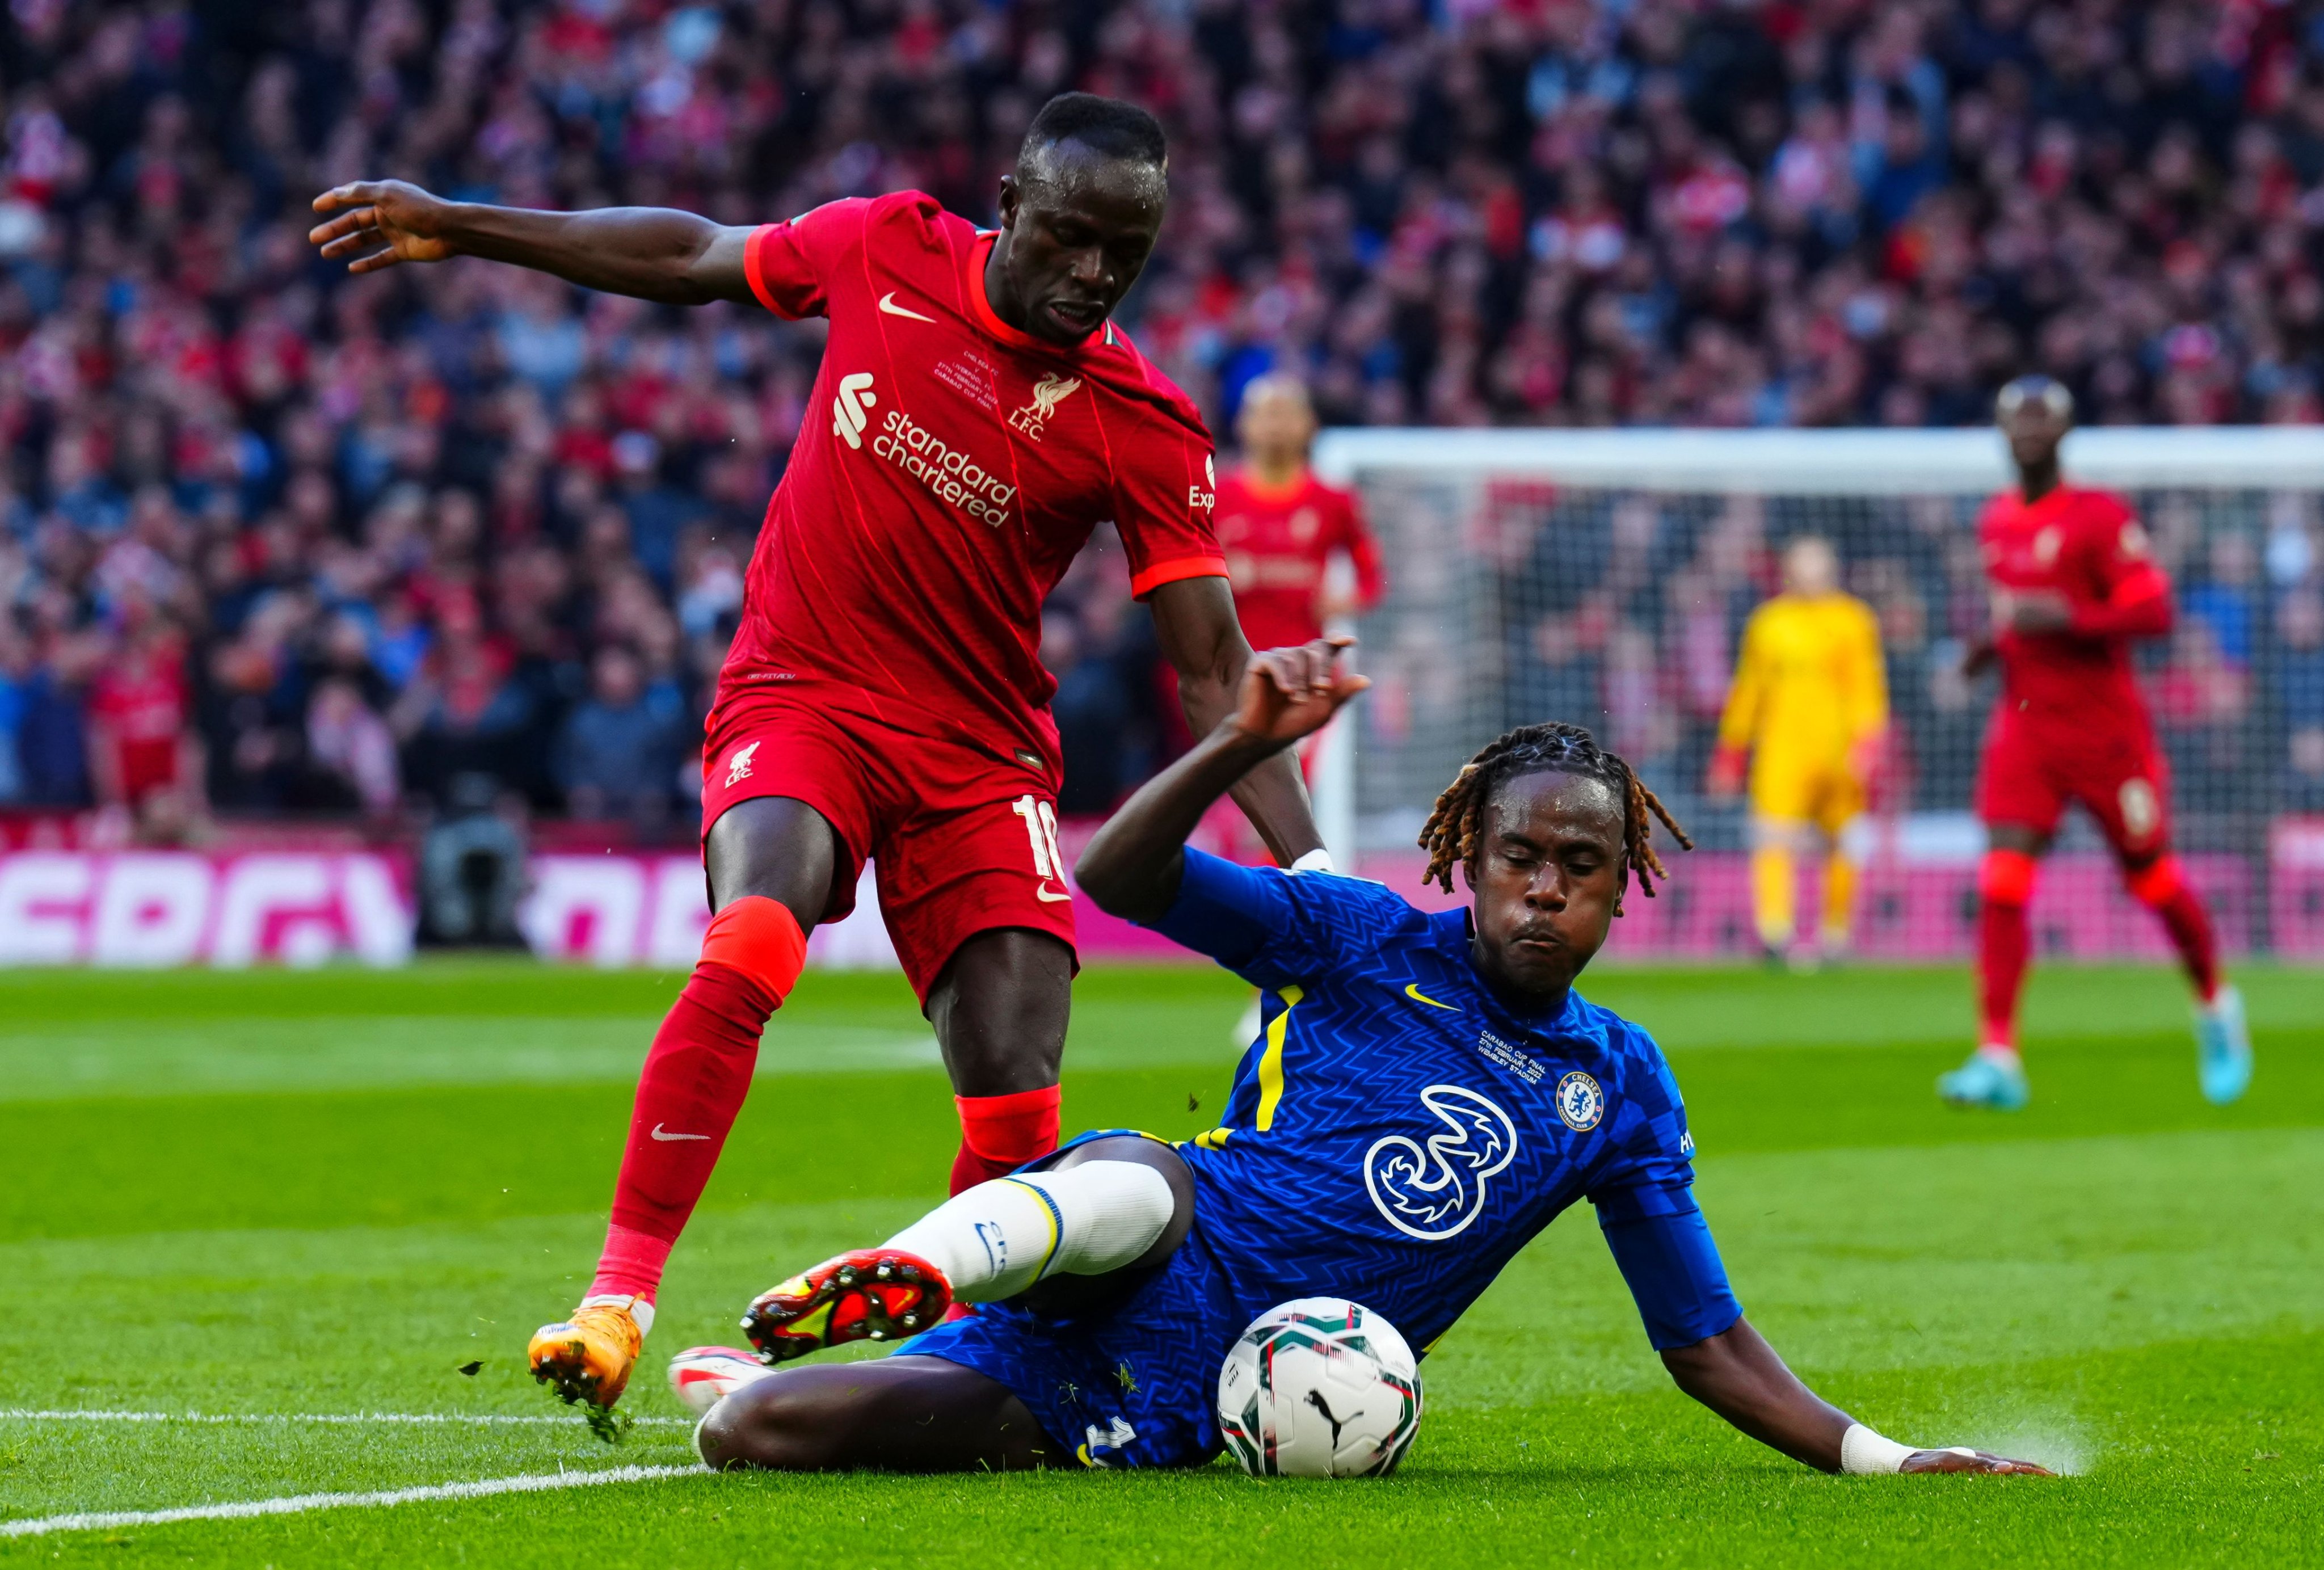 Chelsea vs Liverpool LIVE: EFL Cup Final - Goalless at the break as both teams had chances but Mendy's double save is the highlight so far - Follow Live Updates